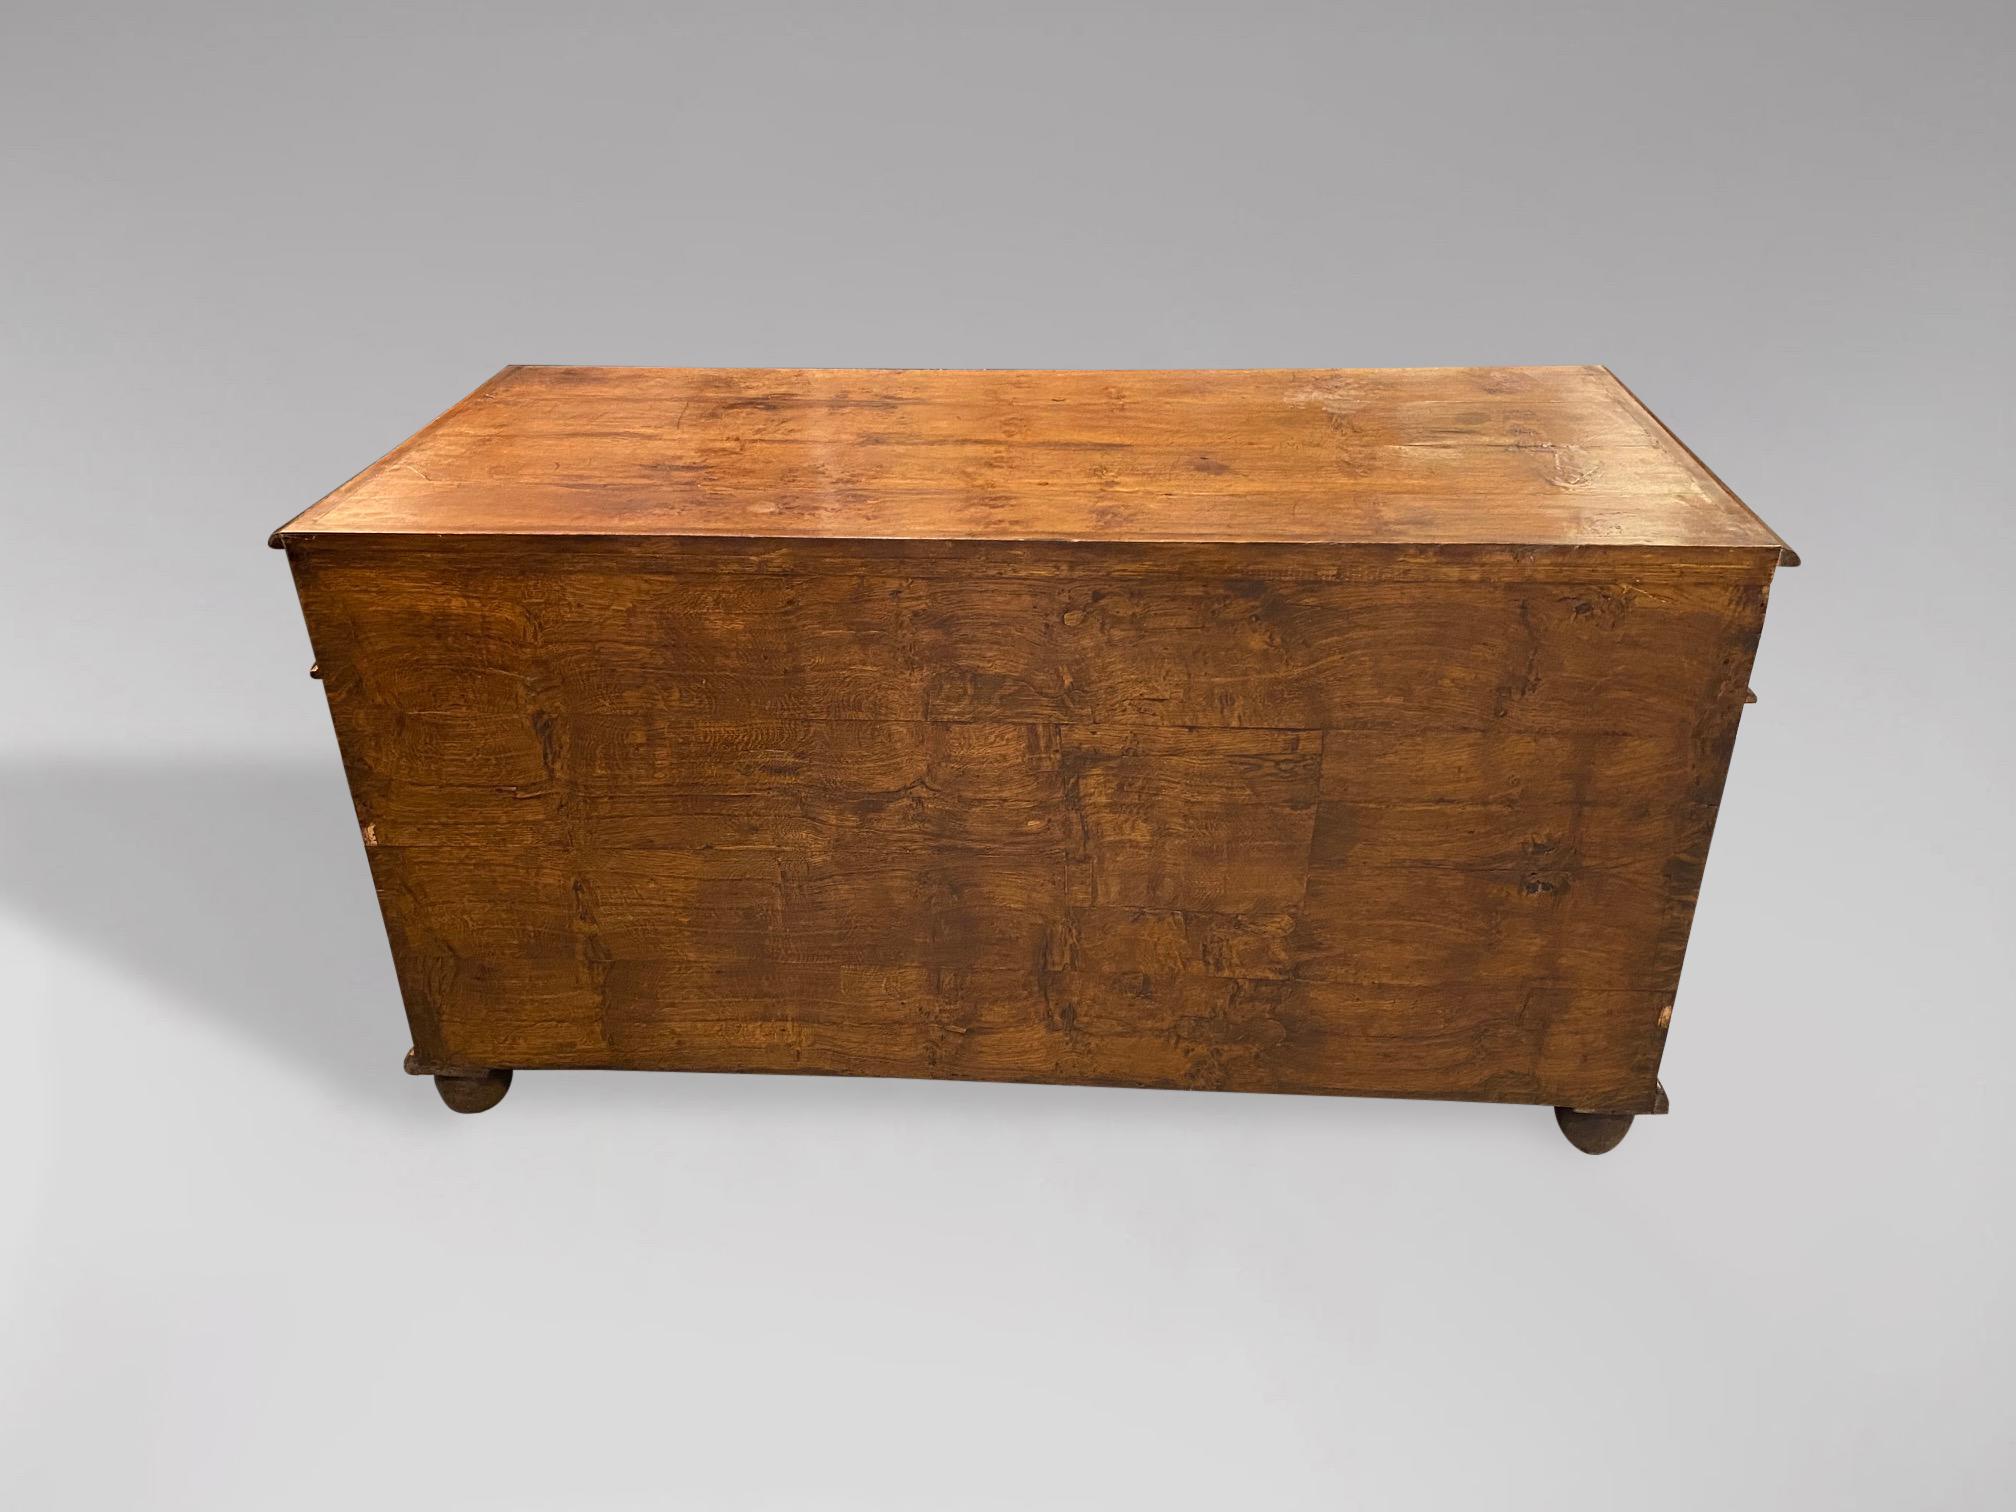 19th Century Desk in Pollard Oak In Good Condition For Sale In Petworth,West Sussex, GB